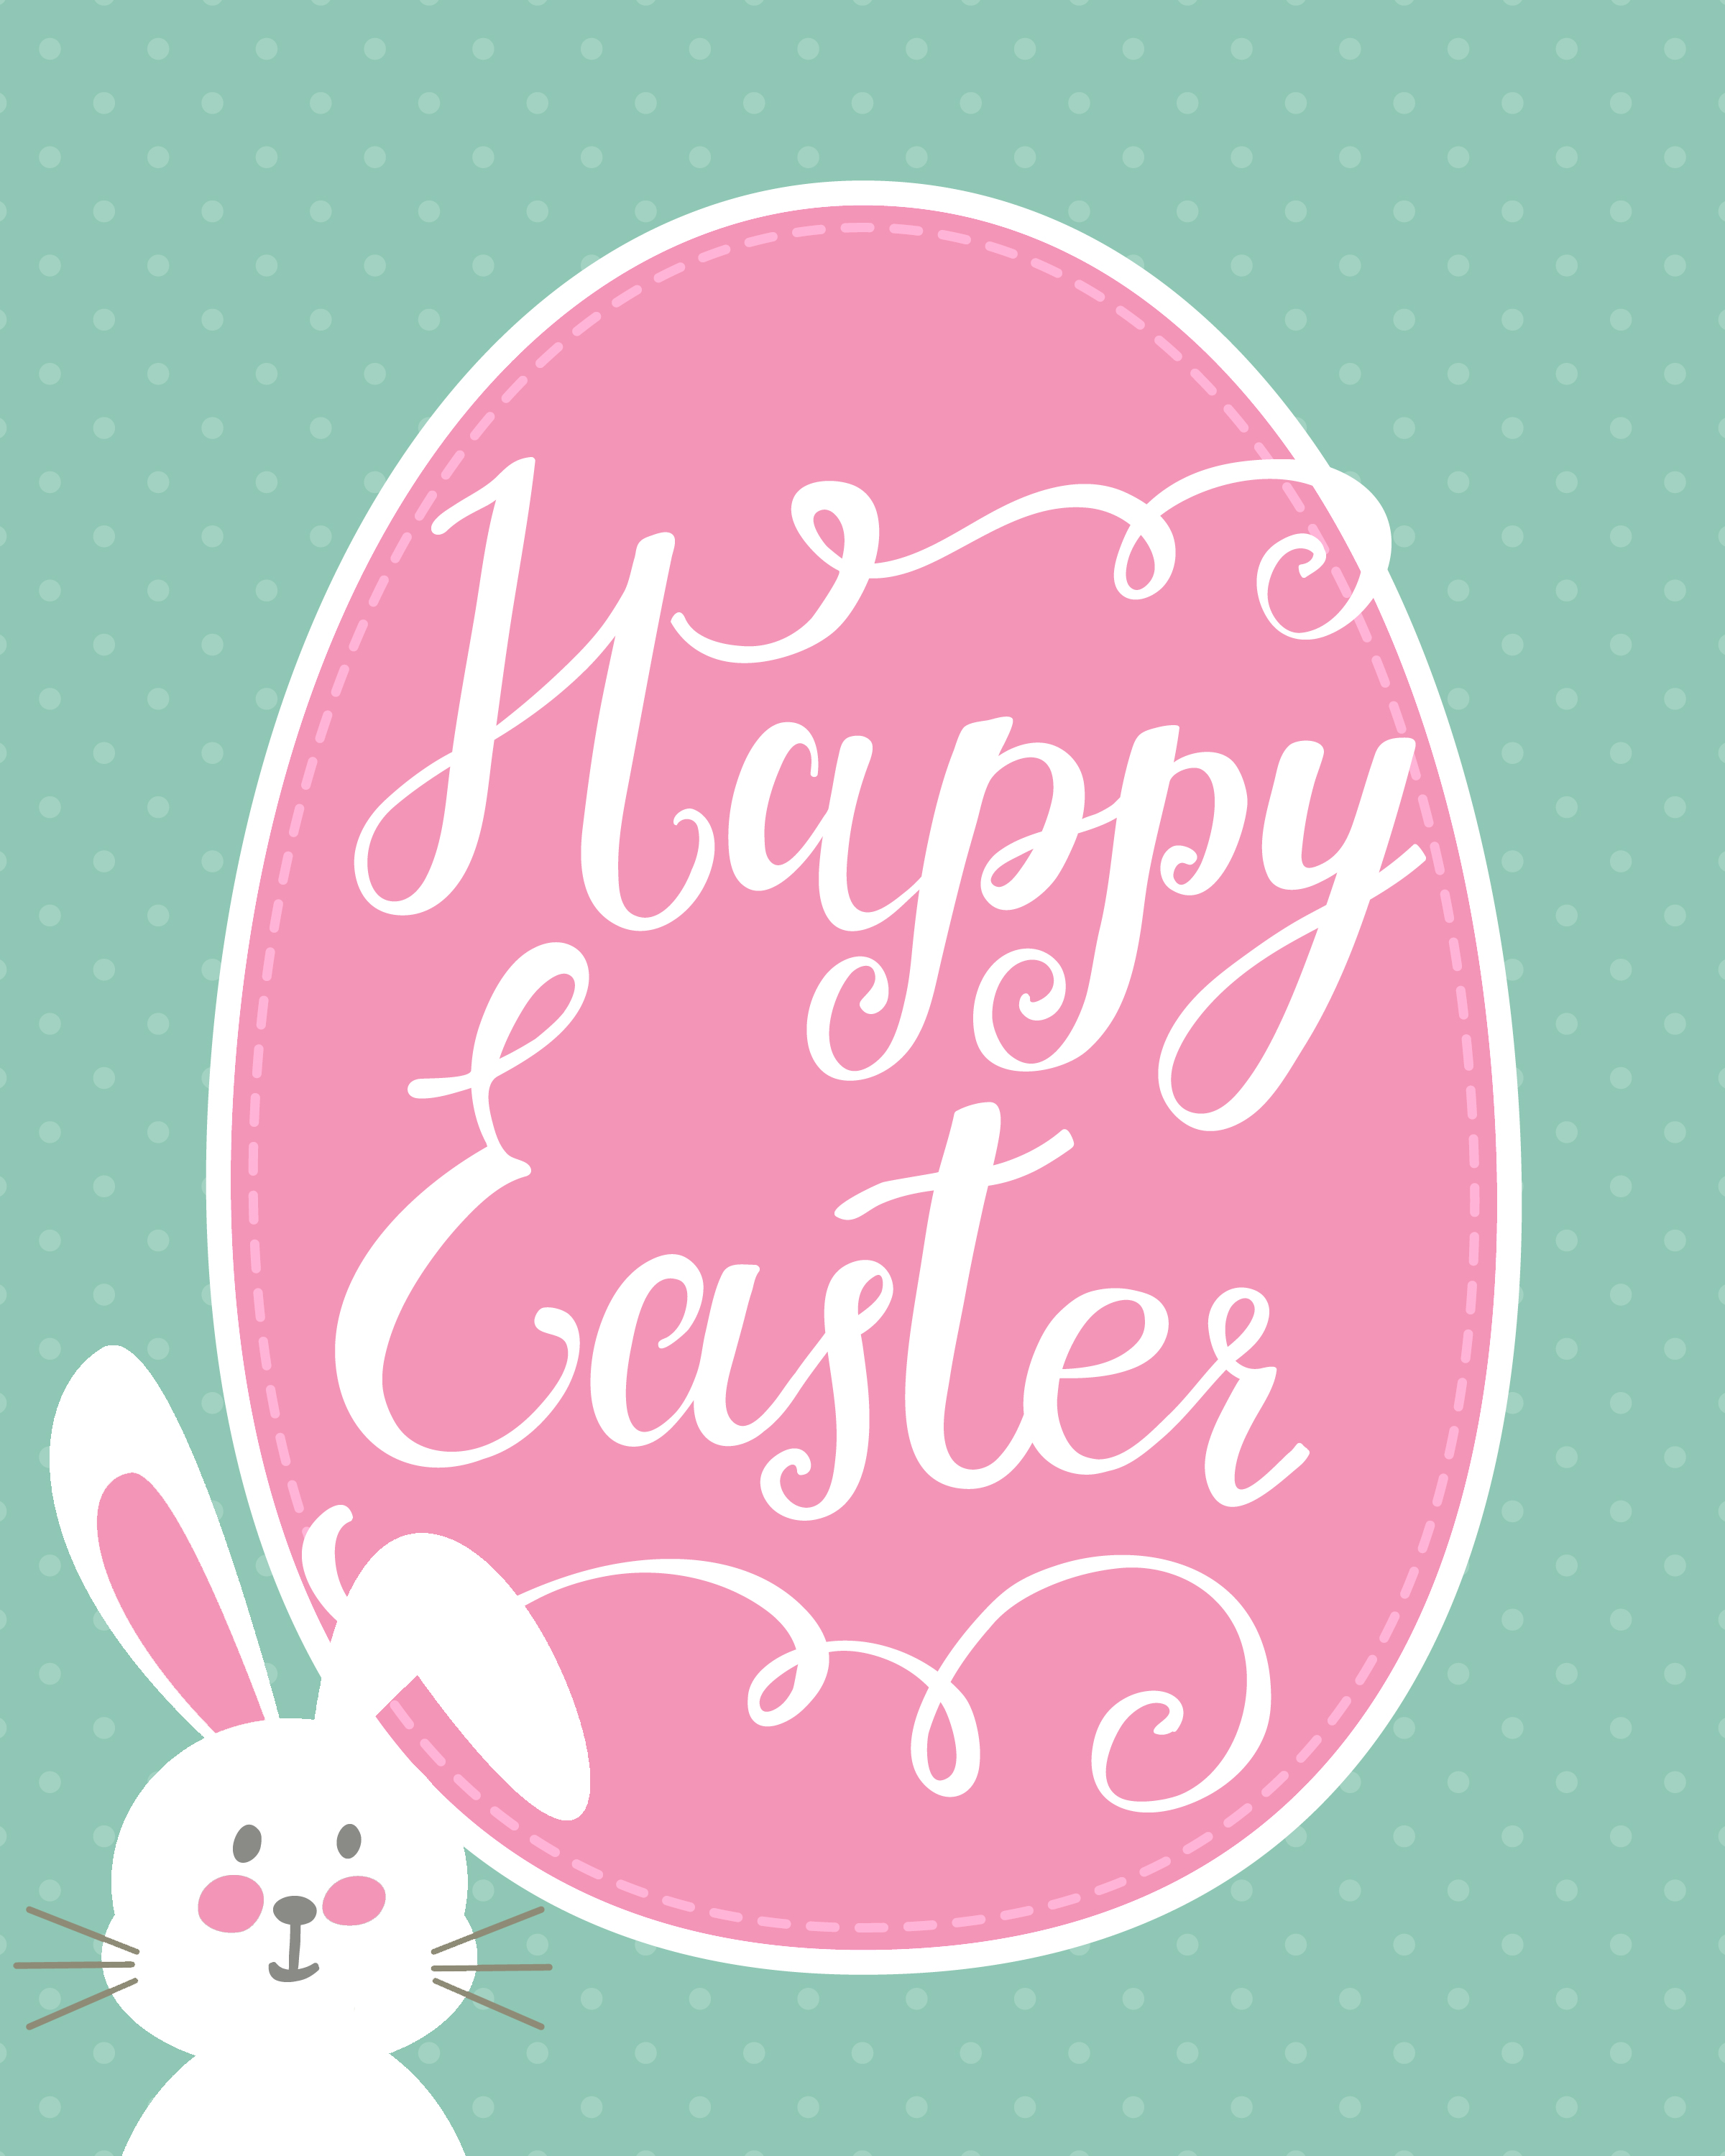 1164 Happy Easter free clipart.